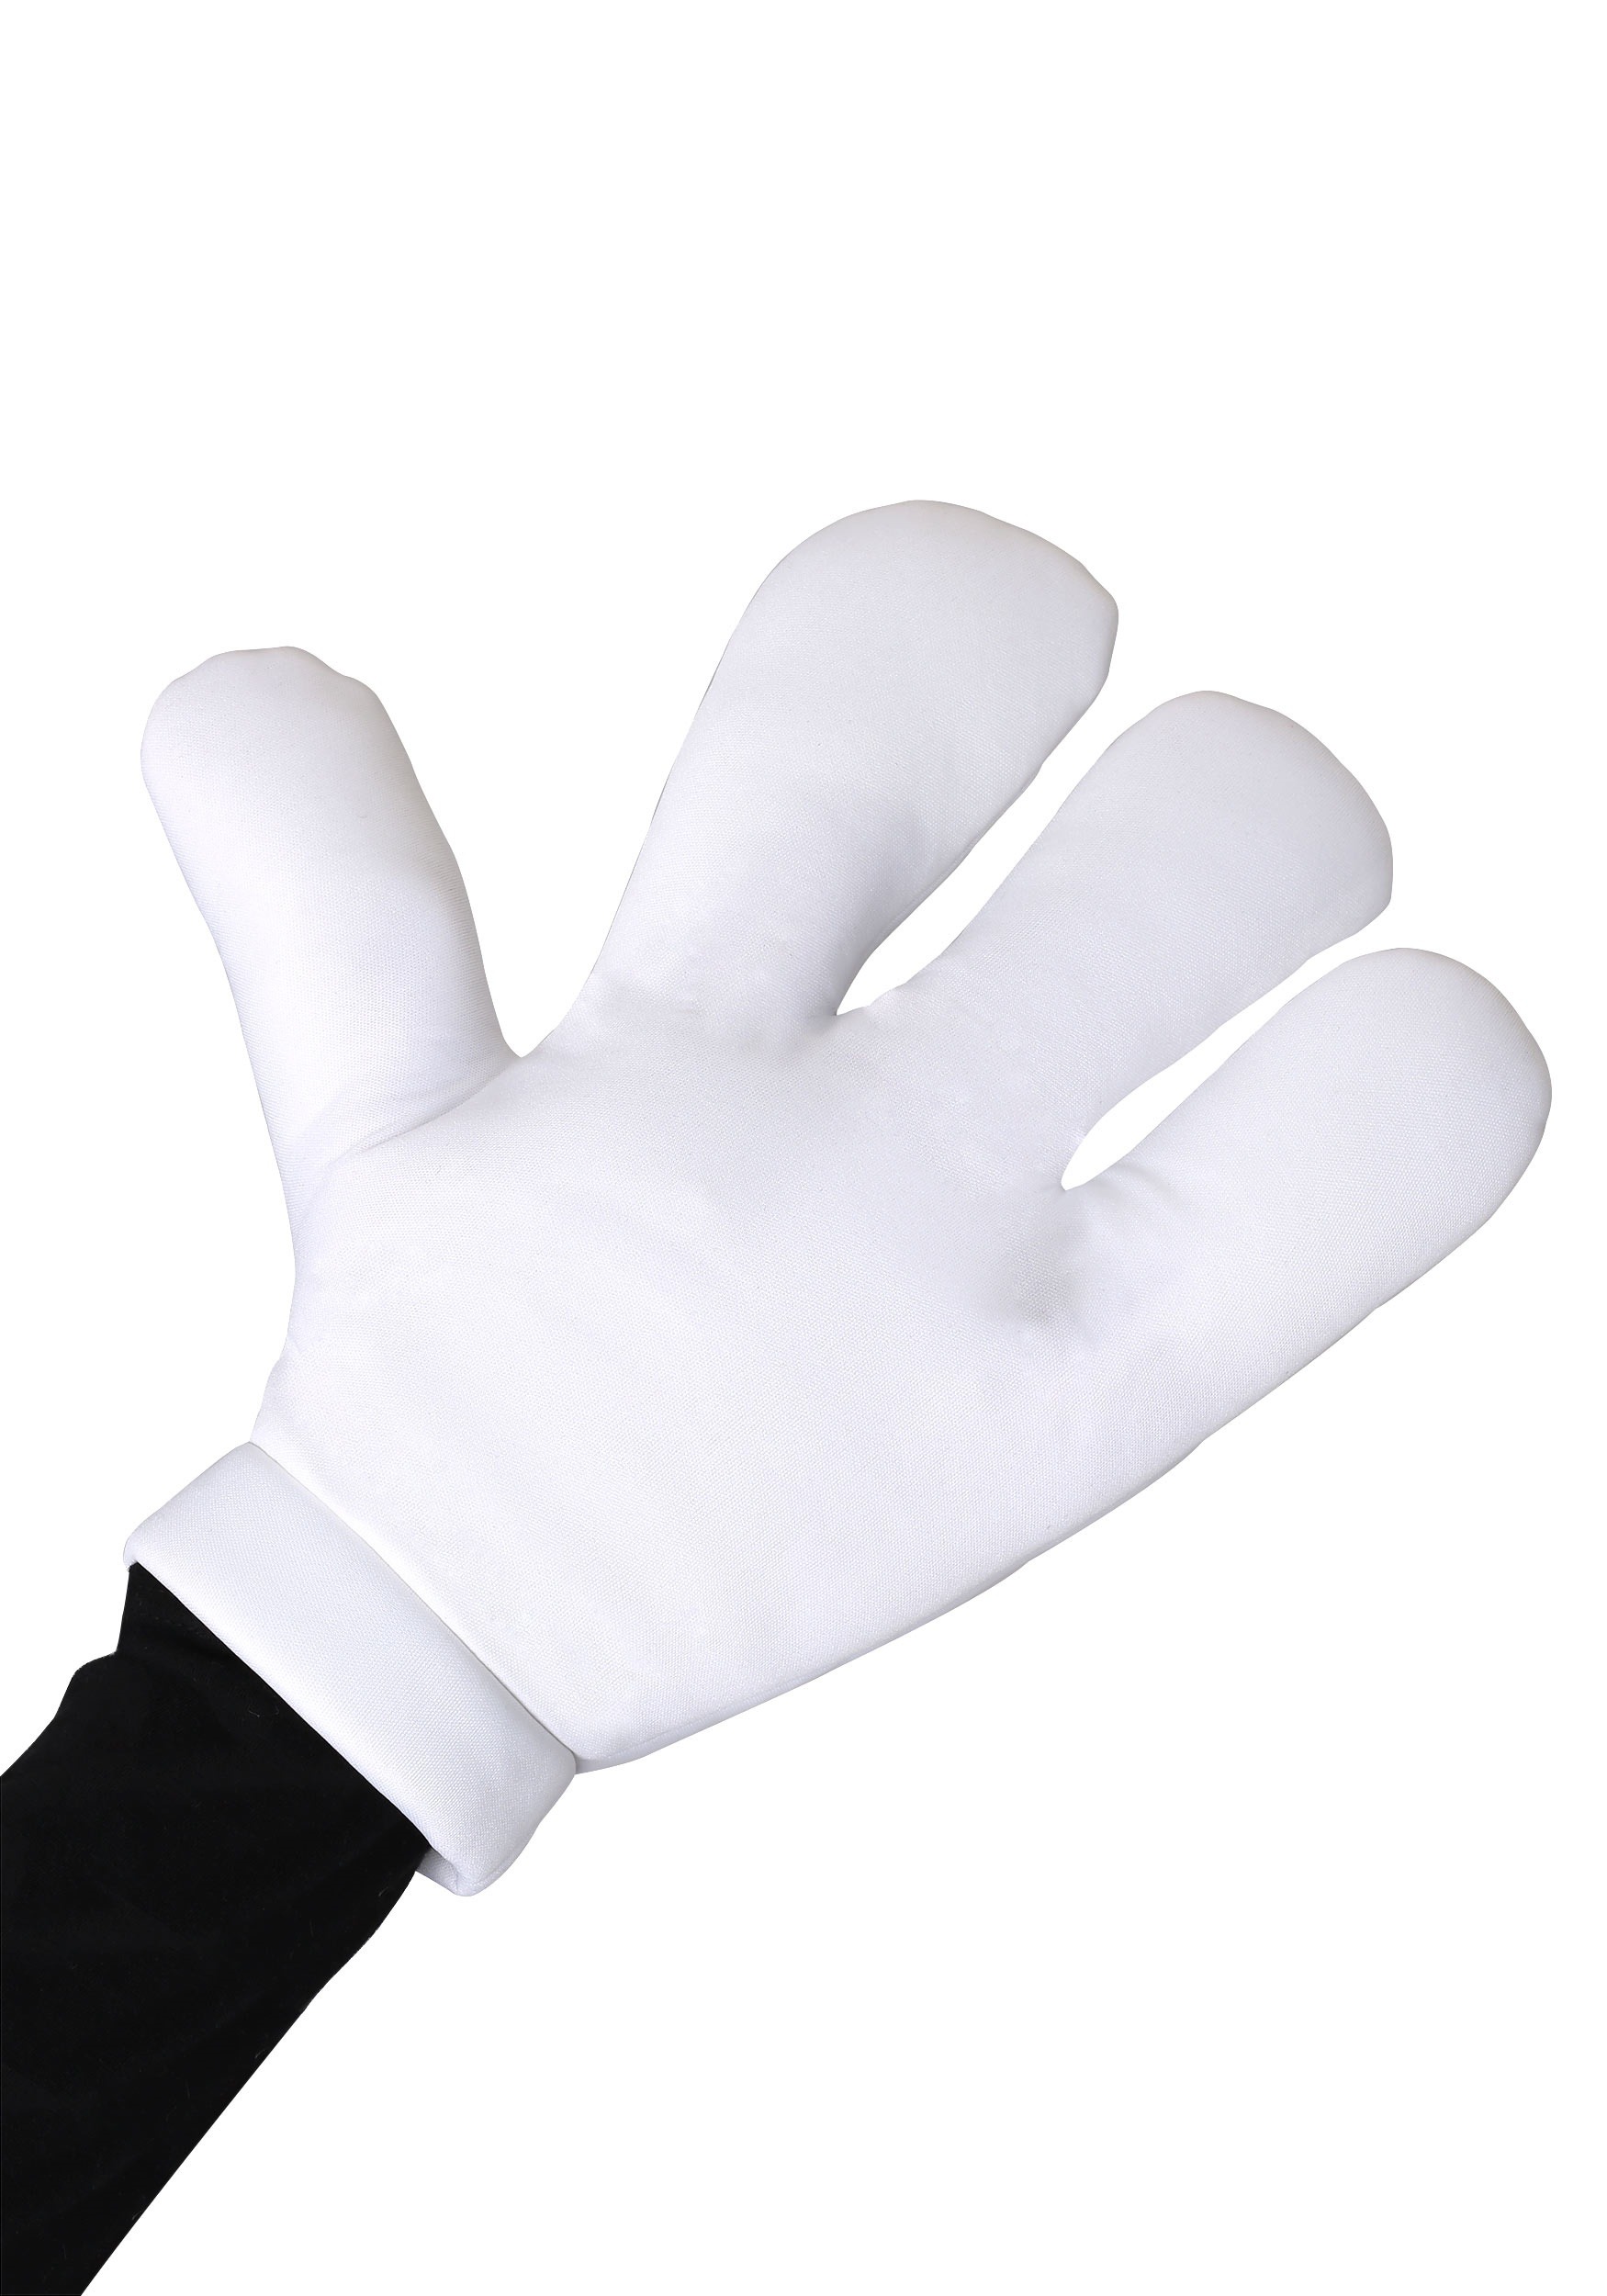 https://images.halloweencostumes.ca/products/44790/2-1-98247/adult-giant-cartoon-hand-gloves-alt-1.jpg